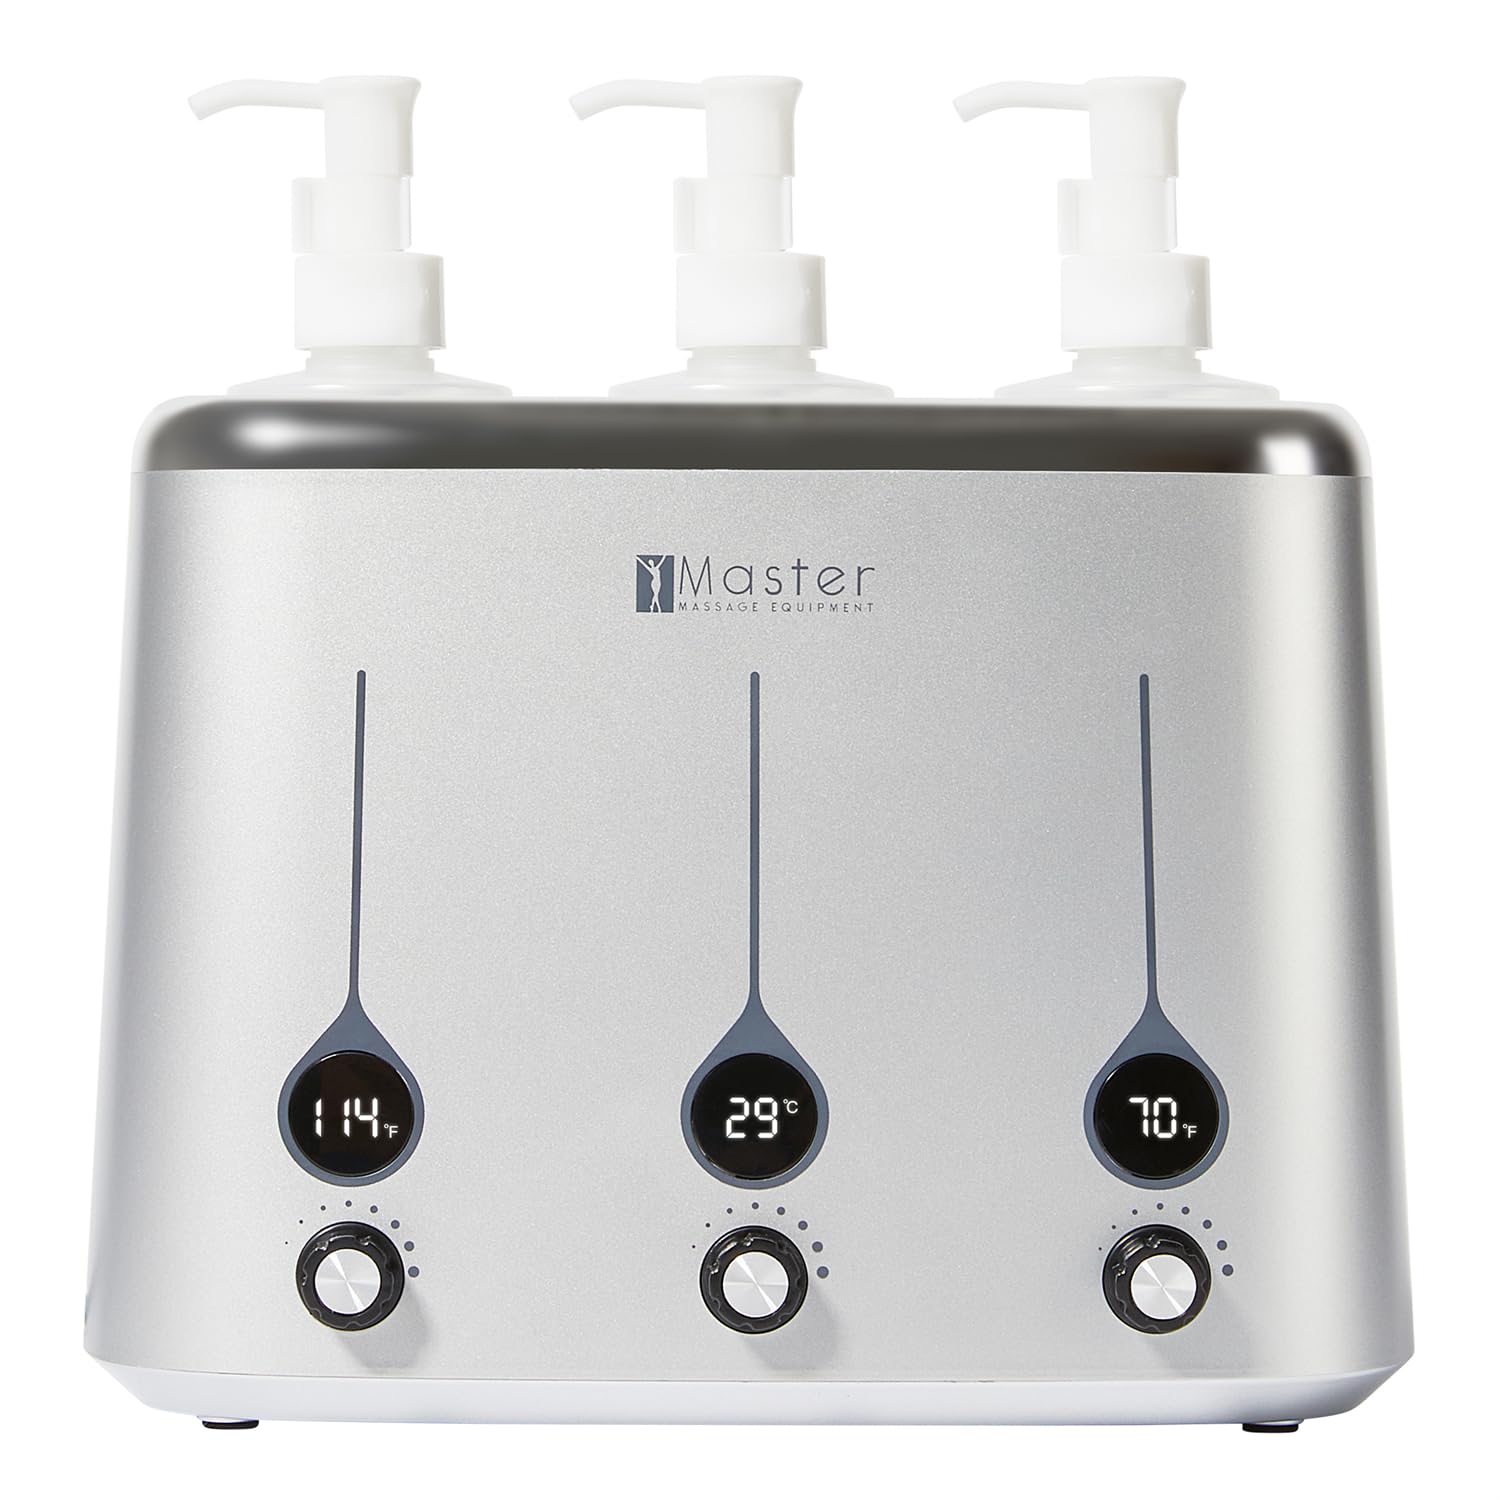 Master Massage Gen-II 3-bottles Oil Warmer for Massage Therapy & Personal Use- Quick Oil & Lotion Warmer Heats up to 140°F- Sleek, Modern Design- Available with 1 or 3 Bottles